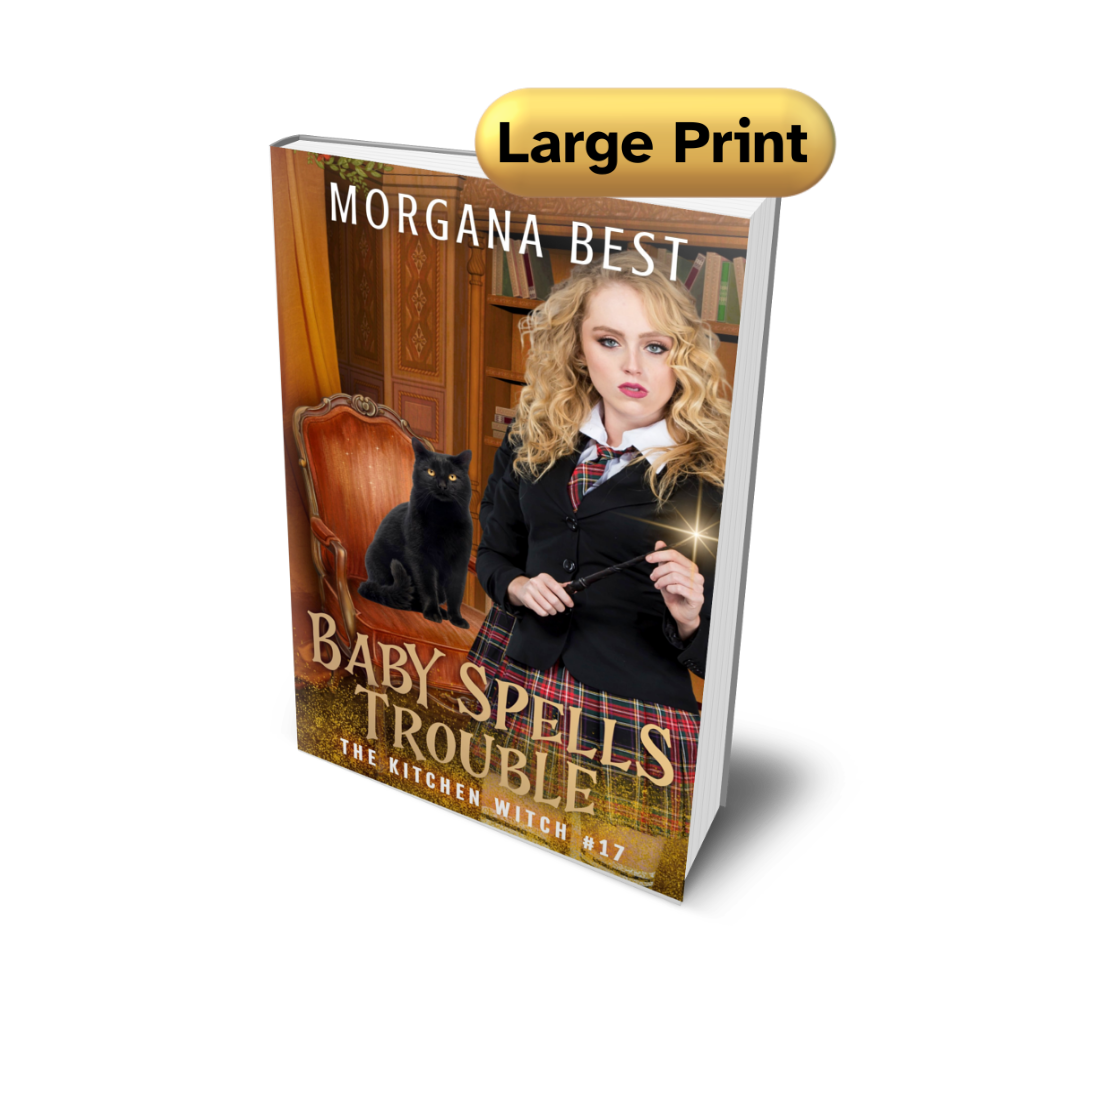 Baby Spells Trouble Large Print PAPERBACK cozy mystery morgana best